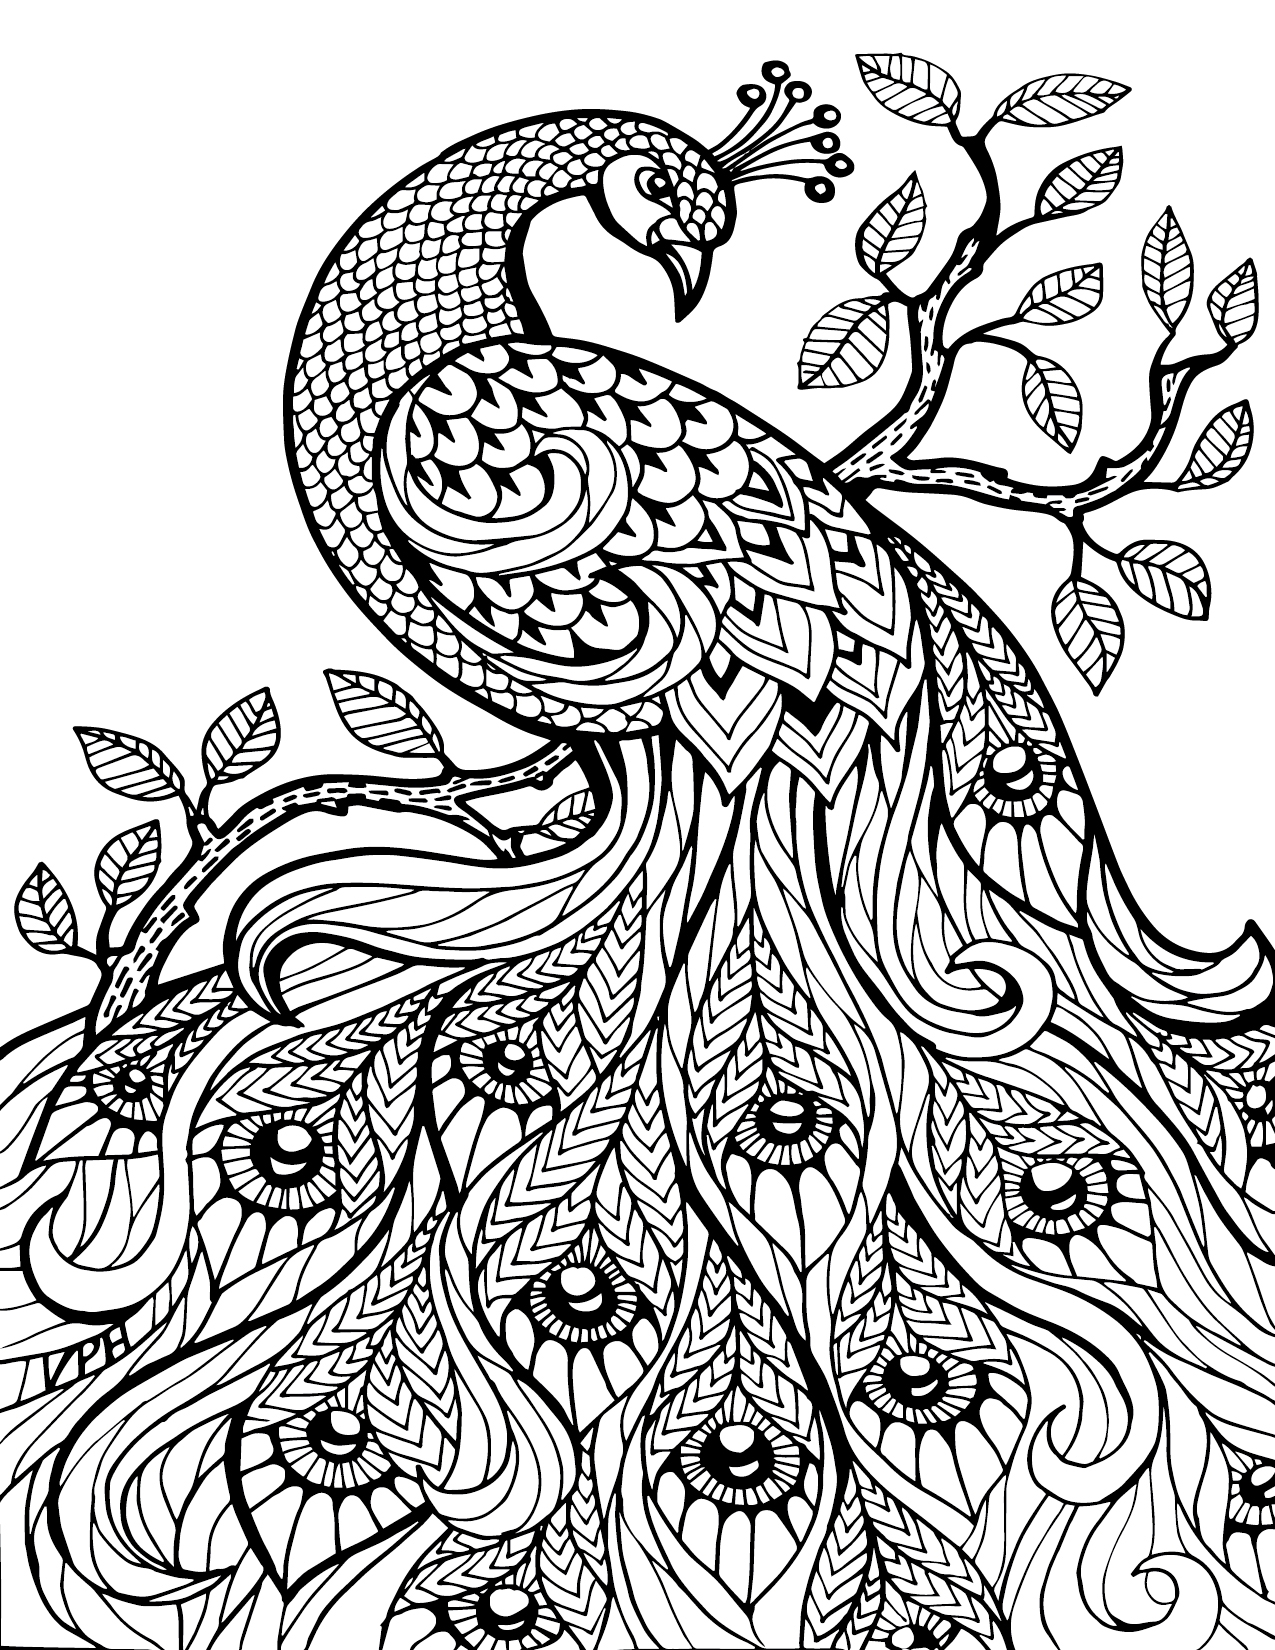 colouring pages for adults of animals detailed coloring pages free detailed coloring pages of animals